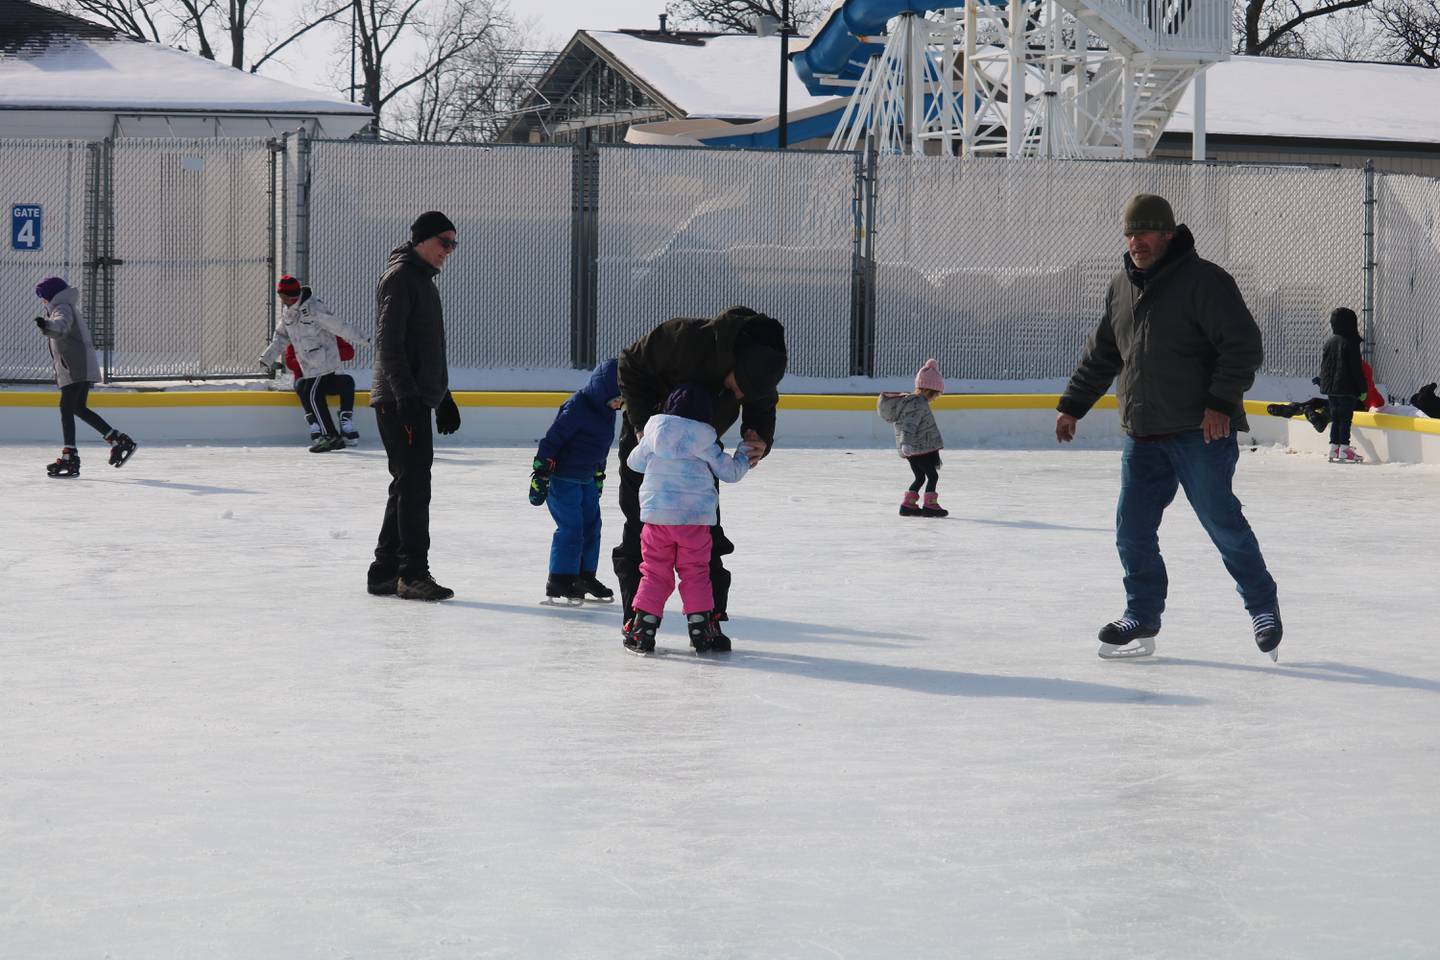 People take to the ice rink to skate during the DeKalb Park District's seventh annual Polar Palooza held Saturday, Feb. 4, 2023.